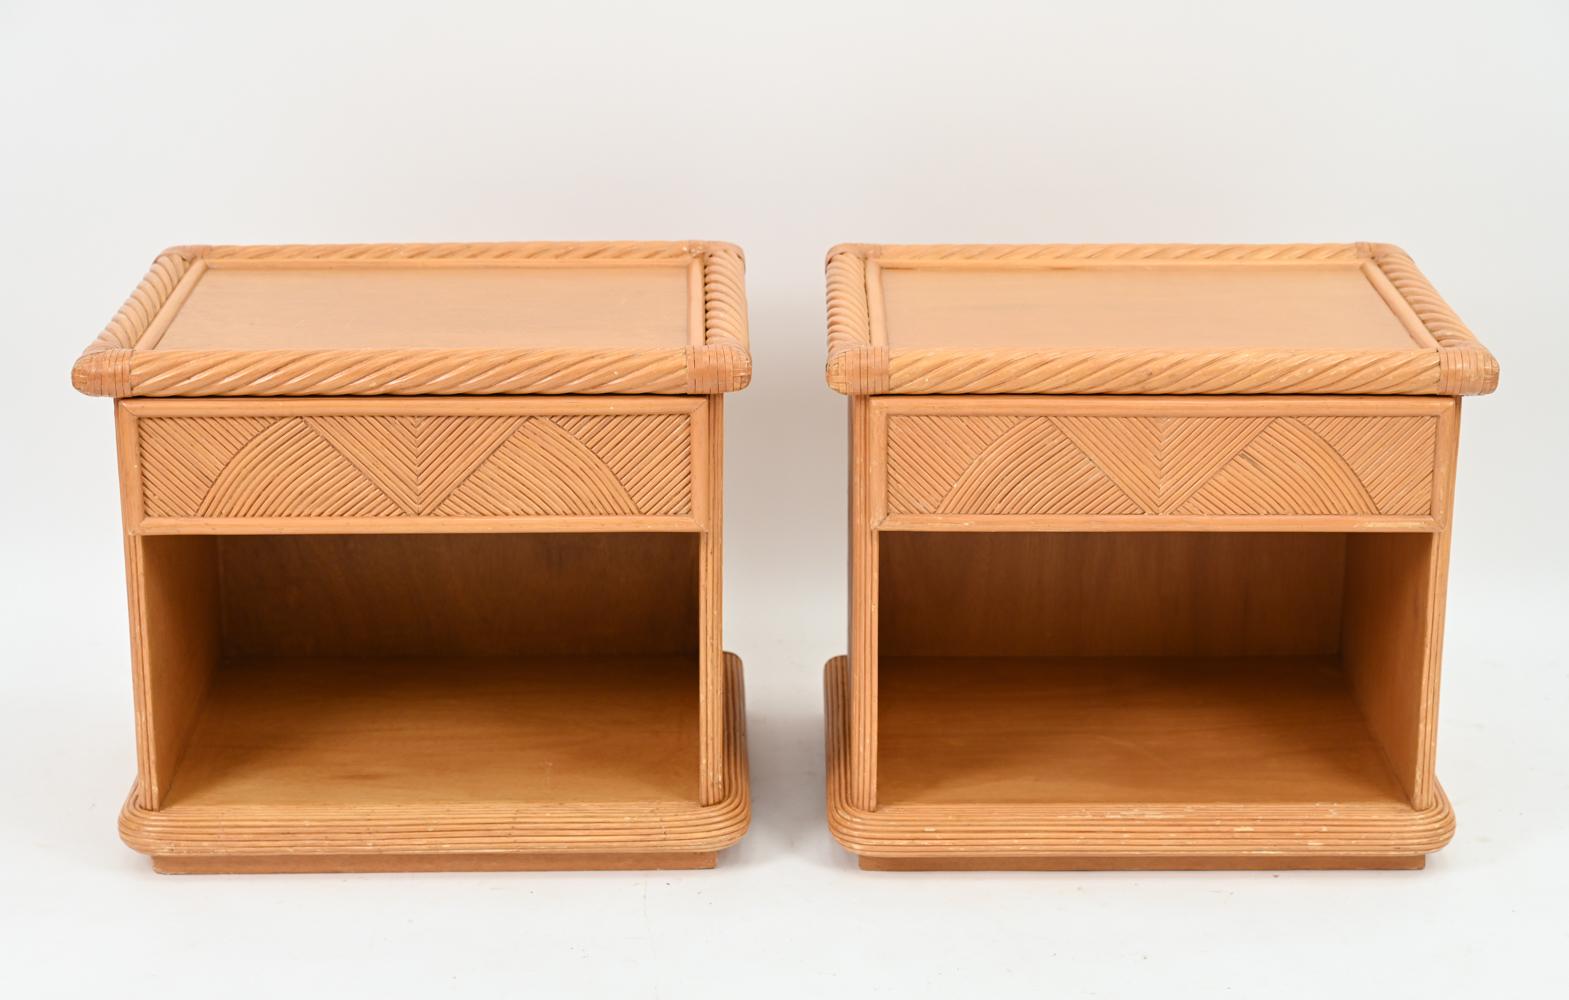 A pair of mid-century rattan single-drawer nightstands or end tables, attributed to Dux; no apparent labels. These Palm Beach-eqsue chests feature a geometric and twisted rattan design with great modern flair.